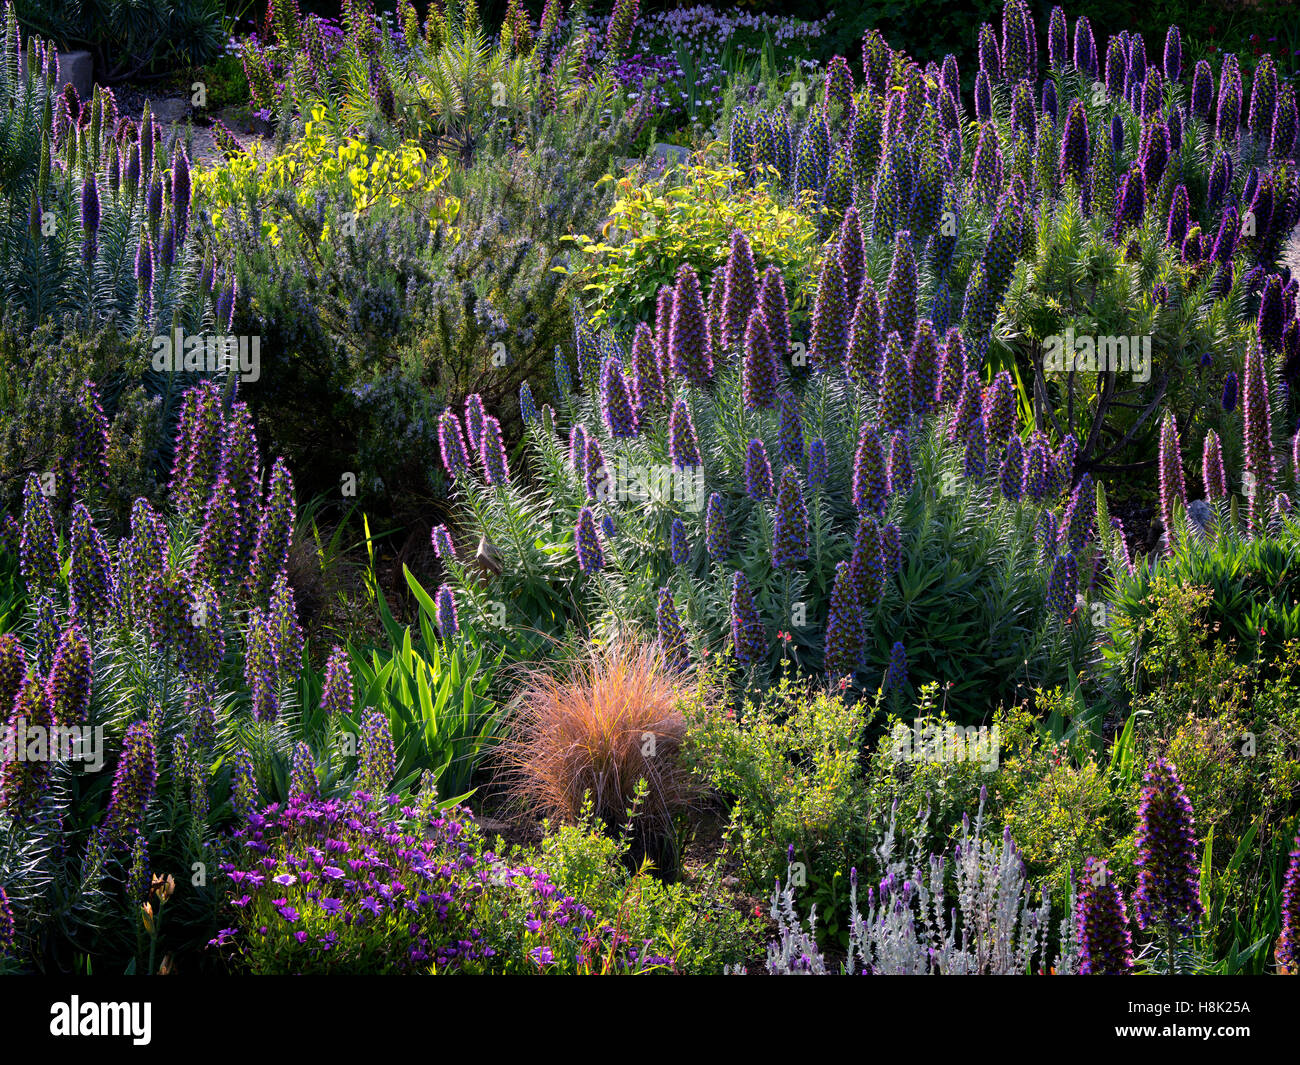 Pride of Madera flowers at Carmel Mission, California Stock Photo